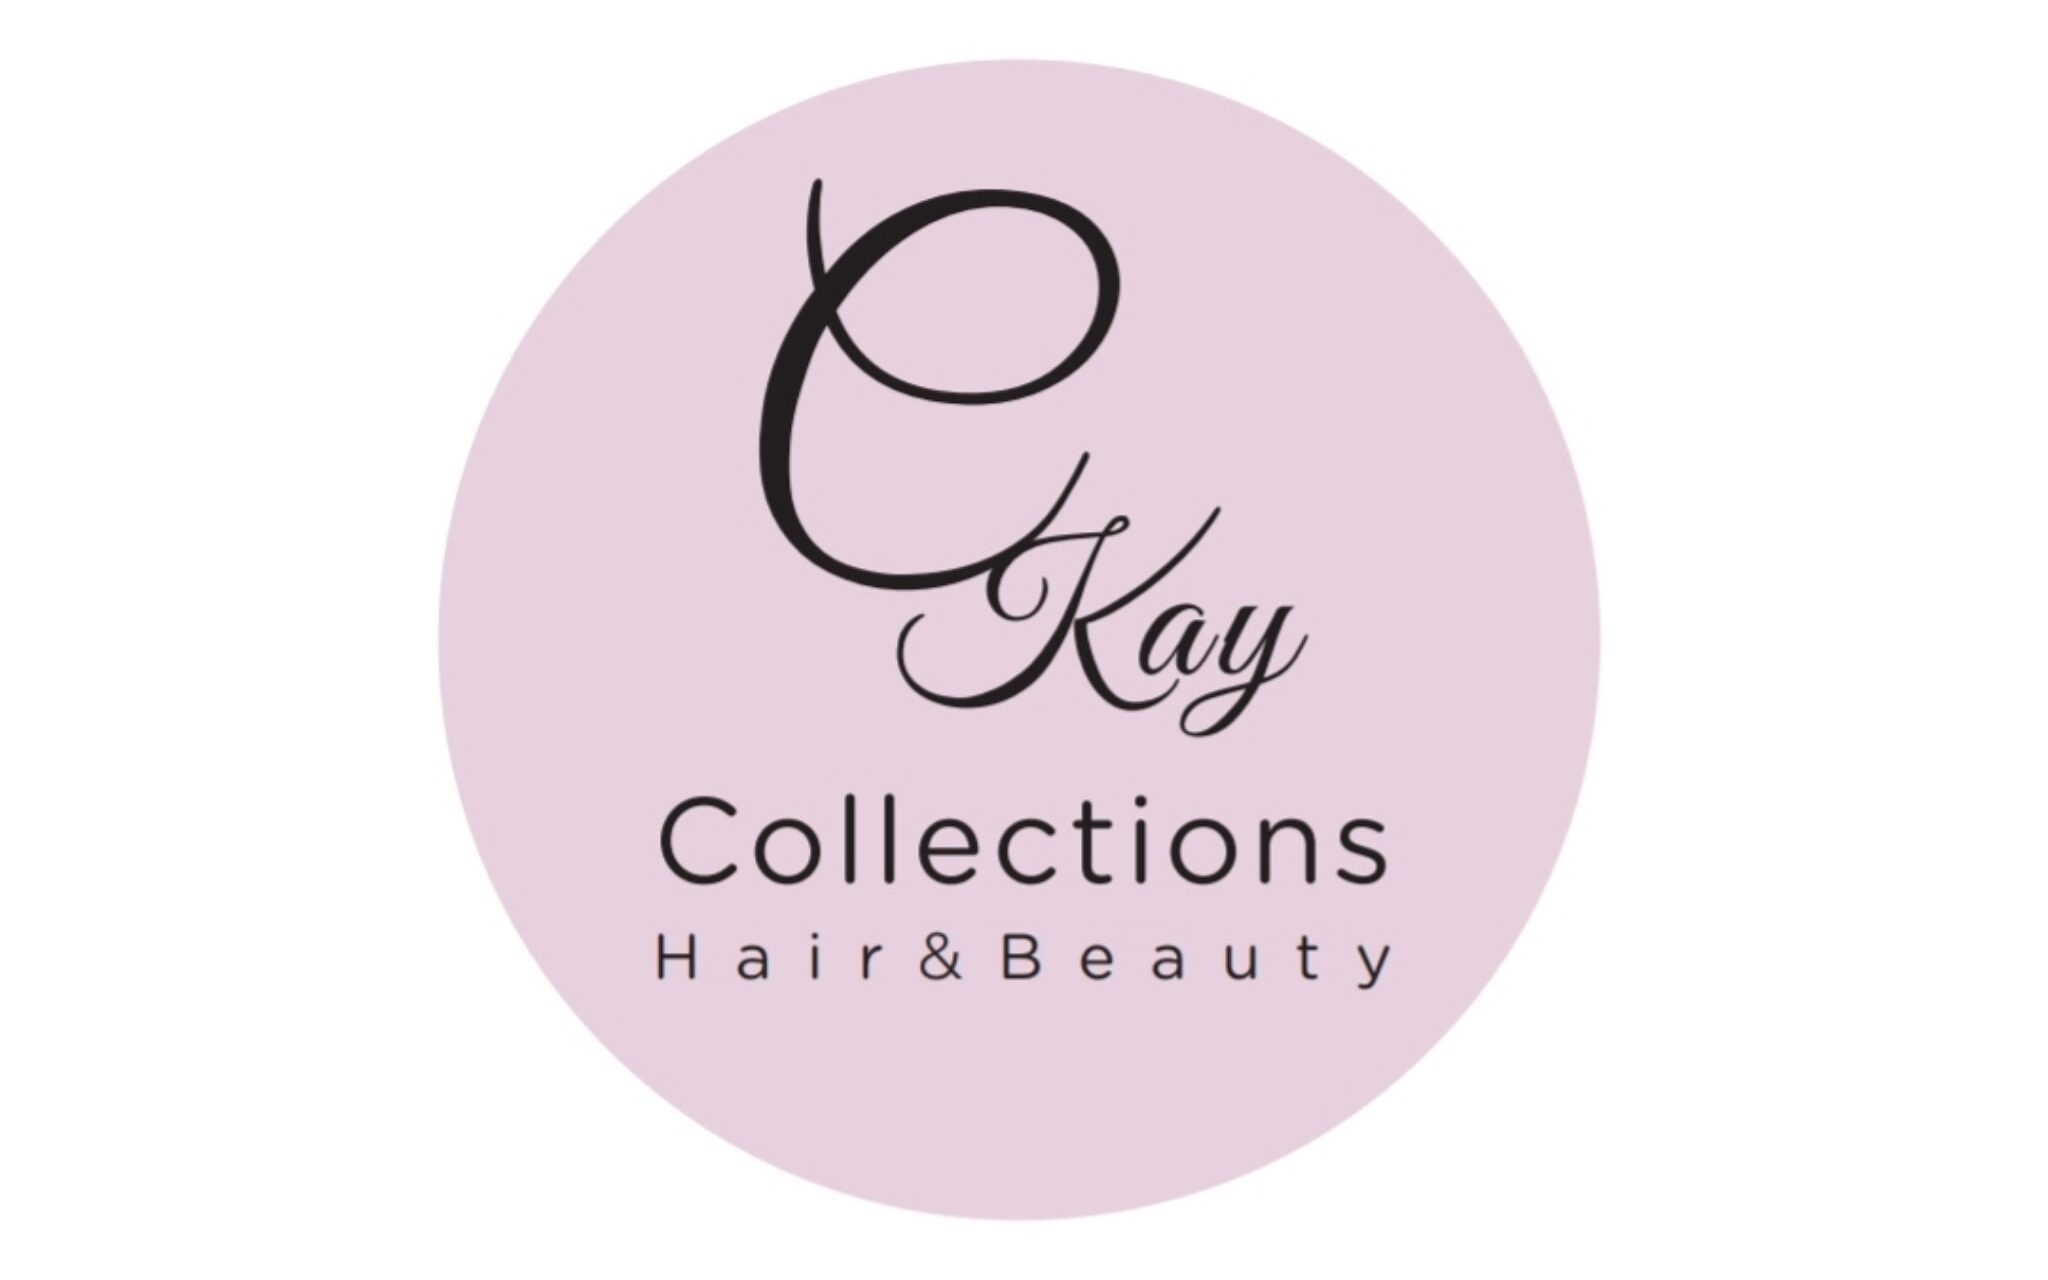 Cinda Kay Luxe Collections